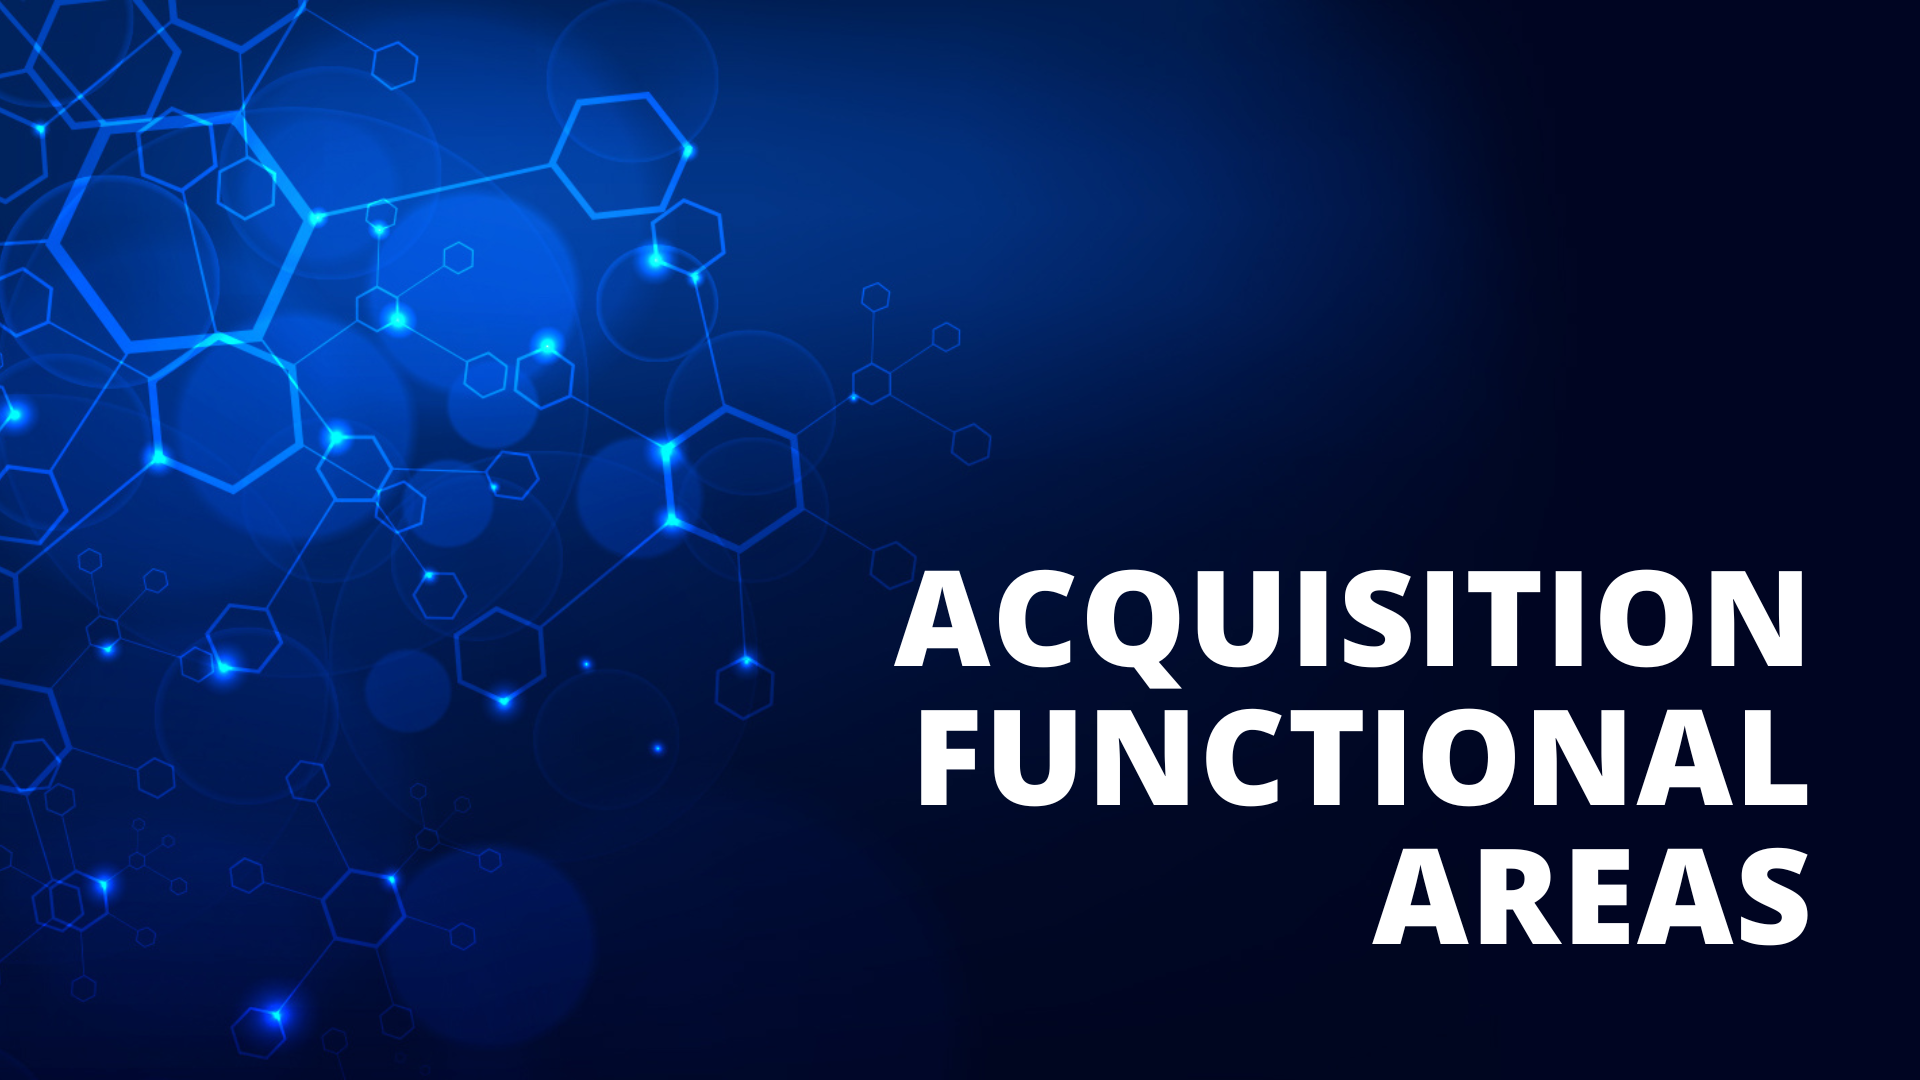 Acquisition Functional Areas